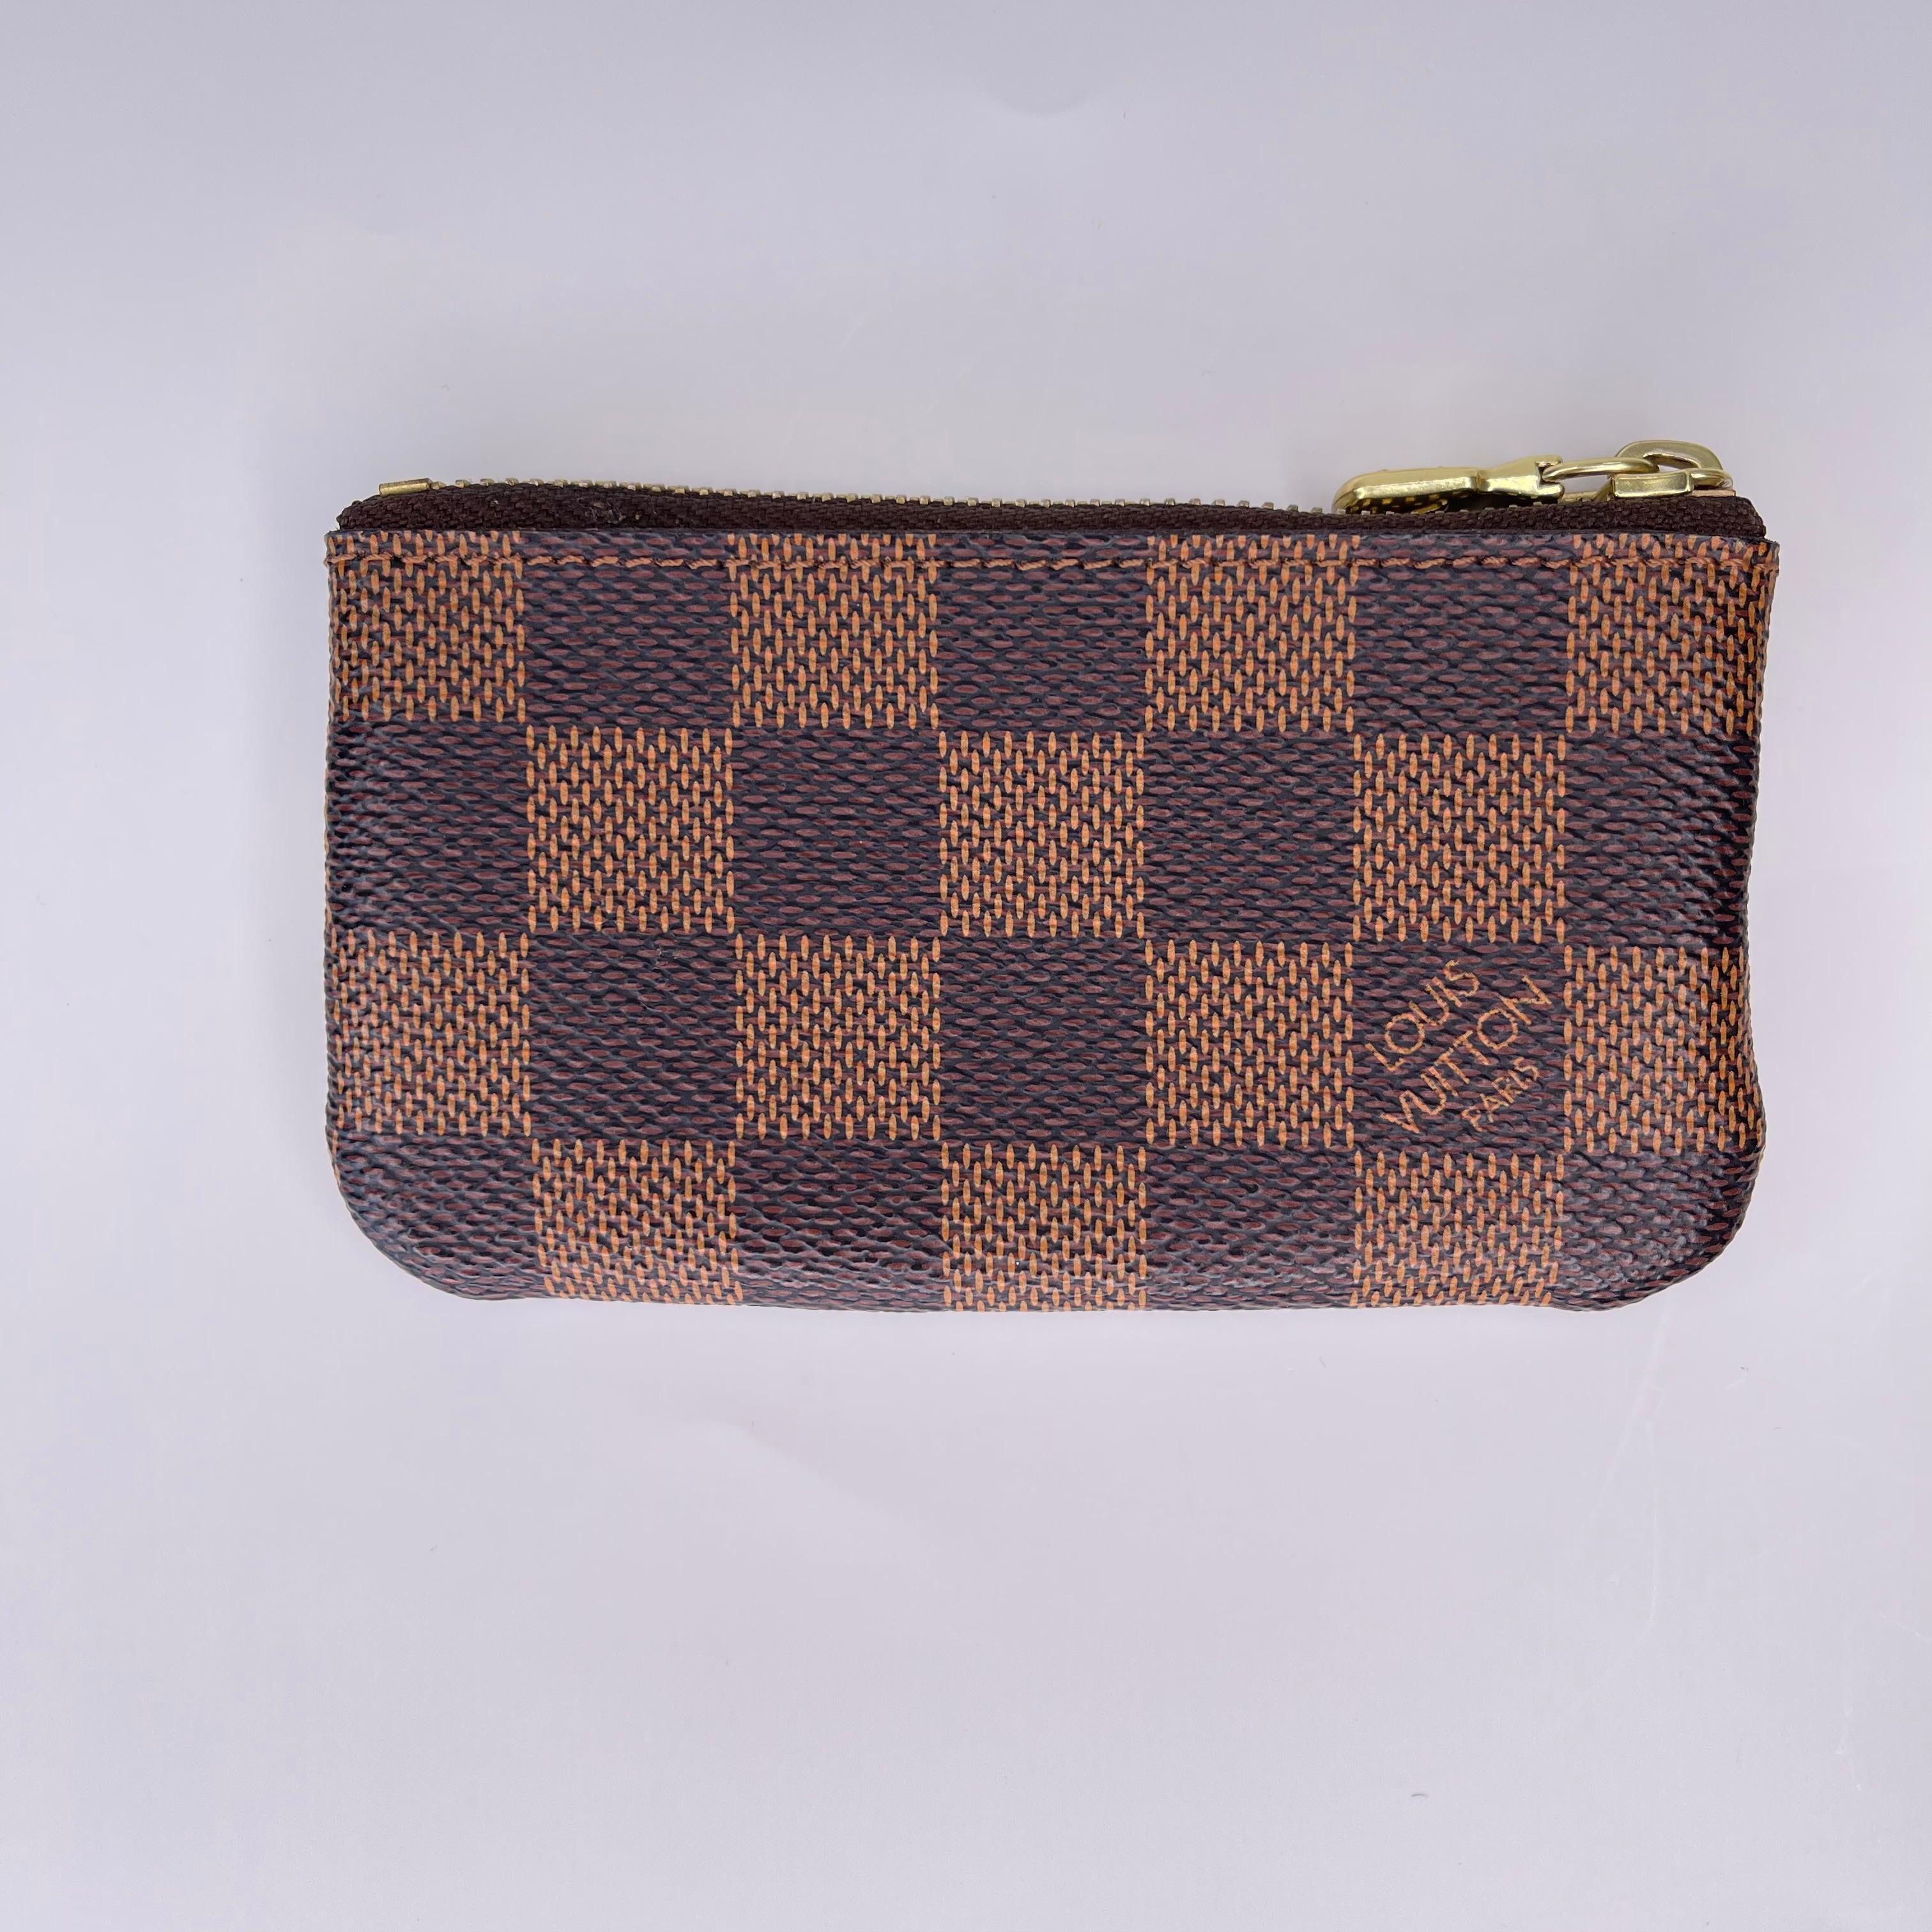 COLOR: Brown/Damier Ebene
MATERIAL: Coated canvas
MEASURES: H 2” x L 3.5”
COMES WITH: Dust bag, box & Receipt
CONDITION: Good - minimal signs of use.

Made in Spain